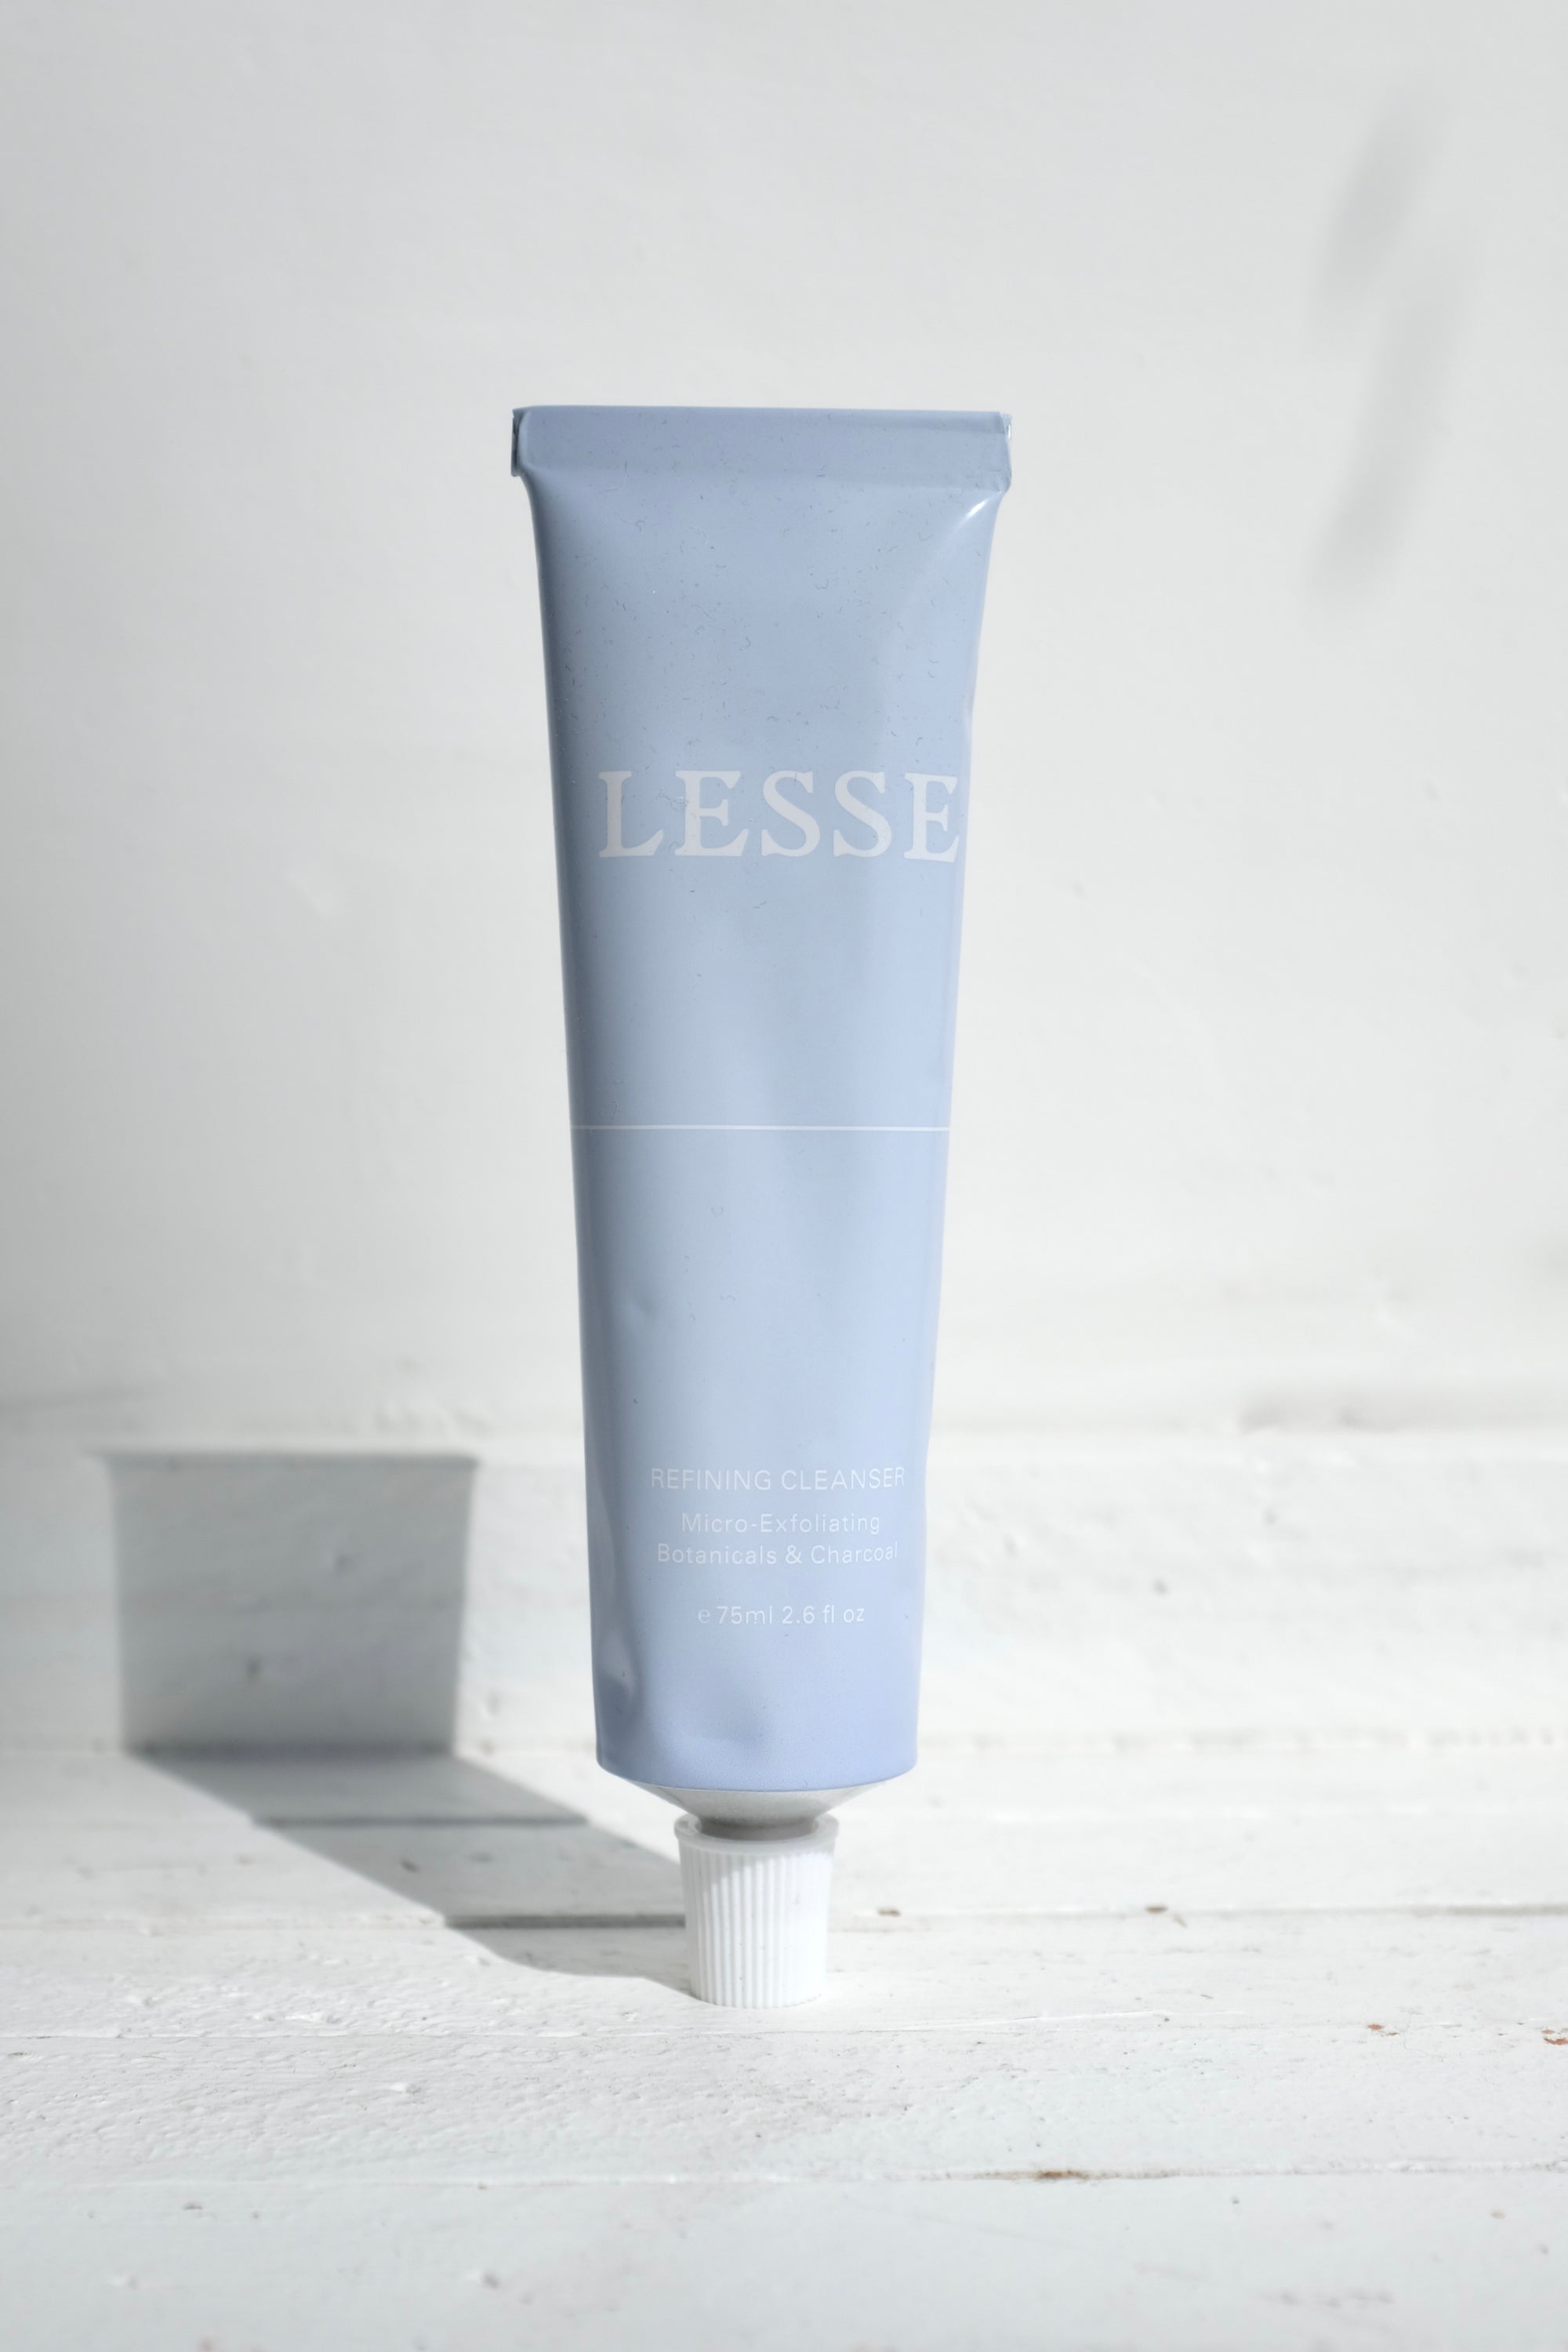 Lesse / Refining Cleanser / Micro-Exfoliating Botanicals & Charcoal 